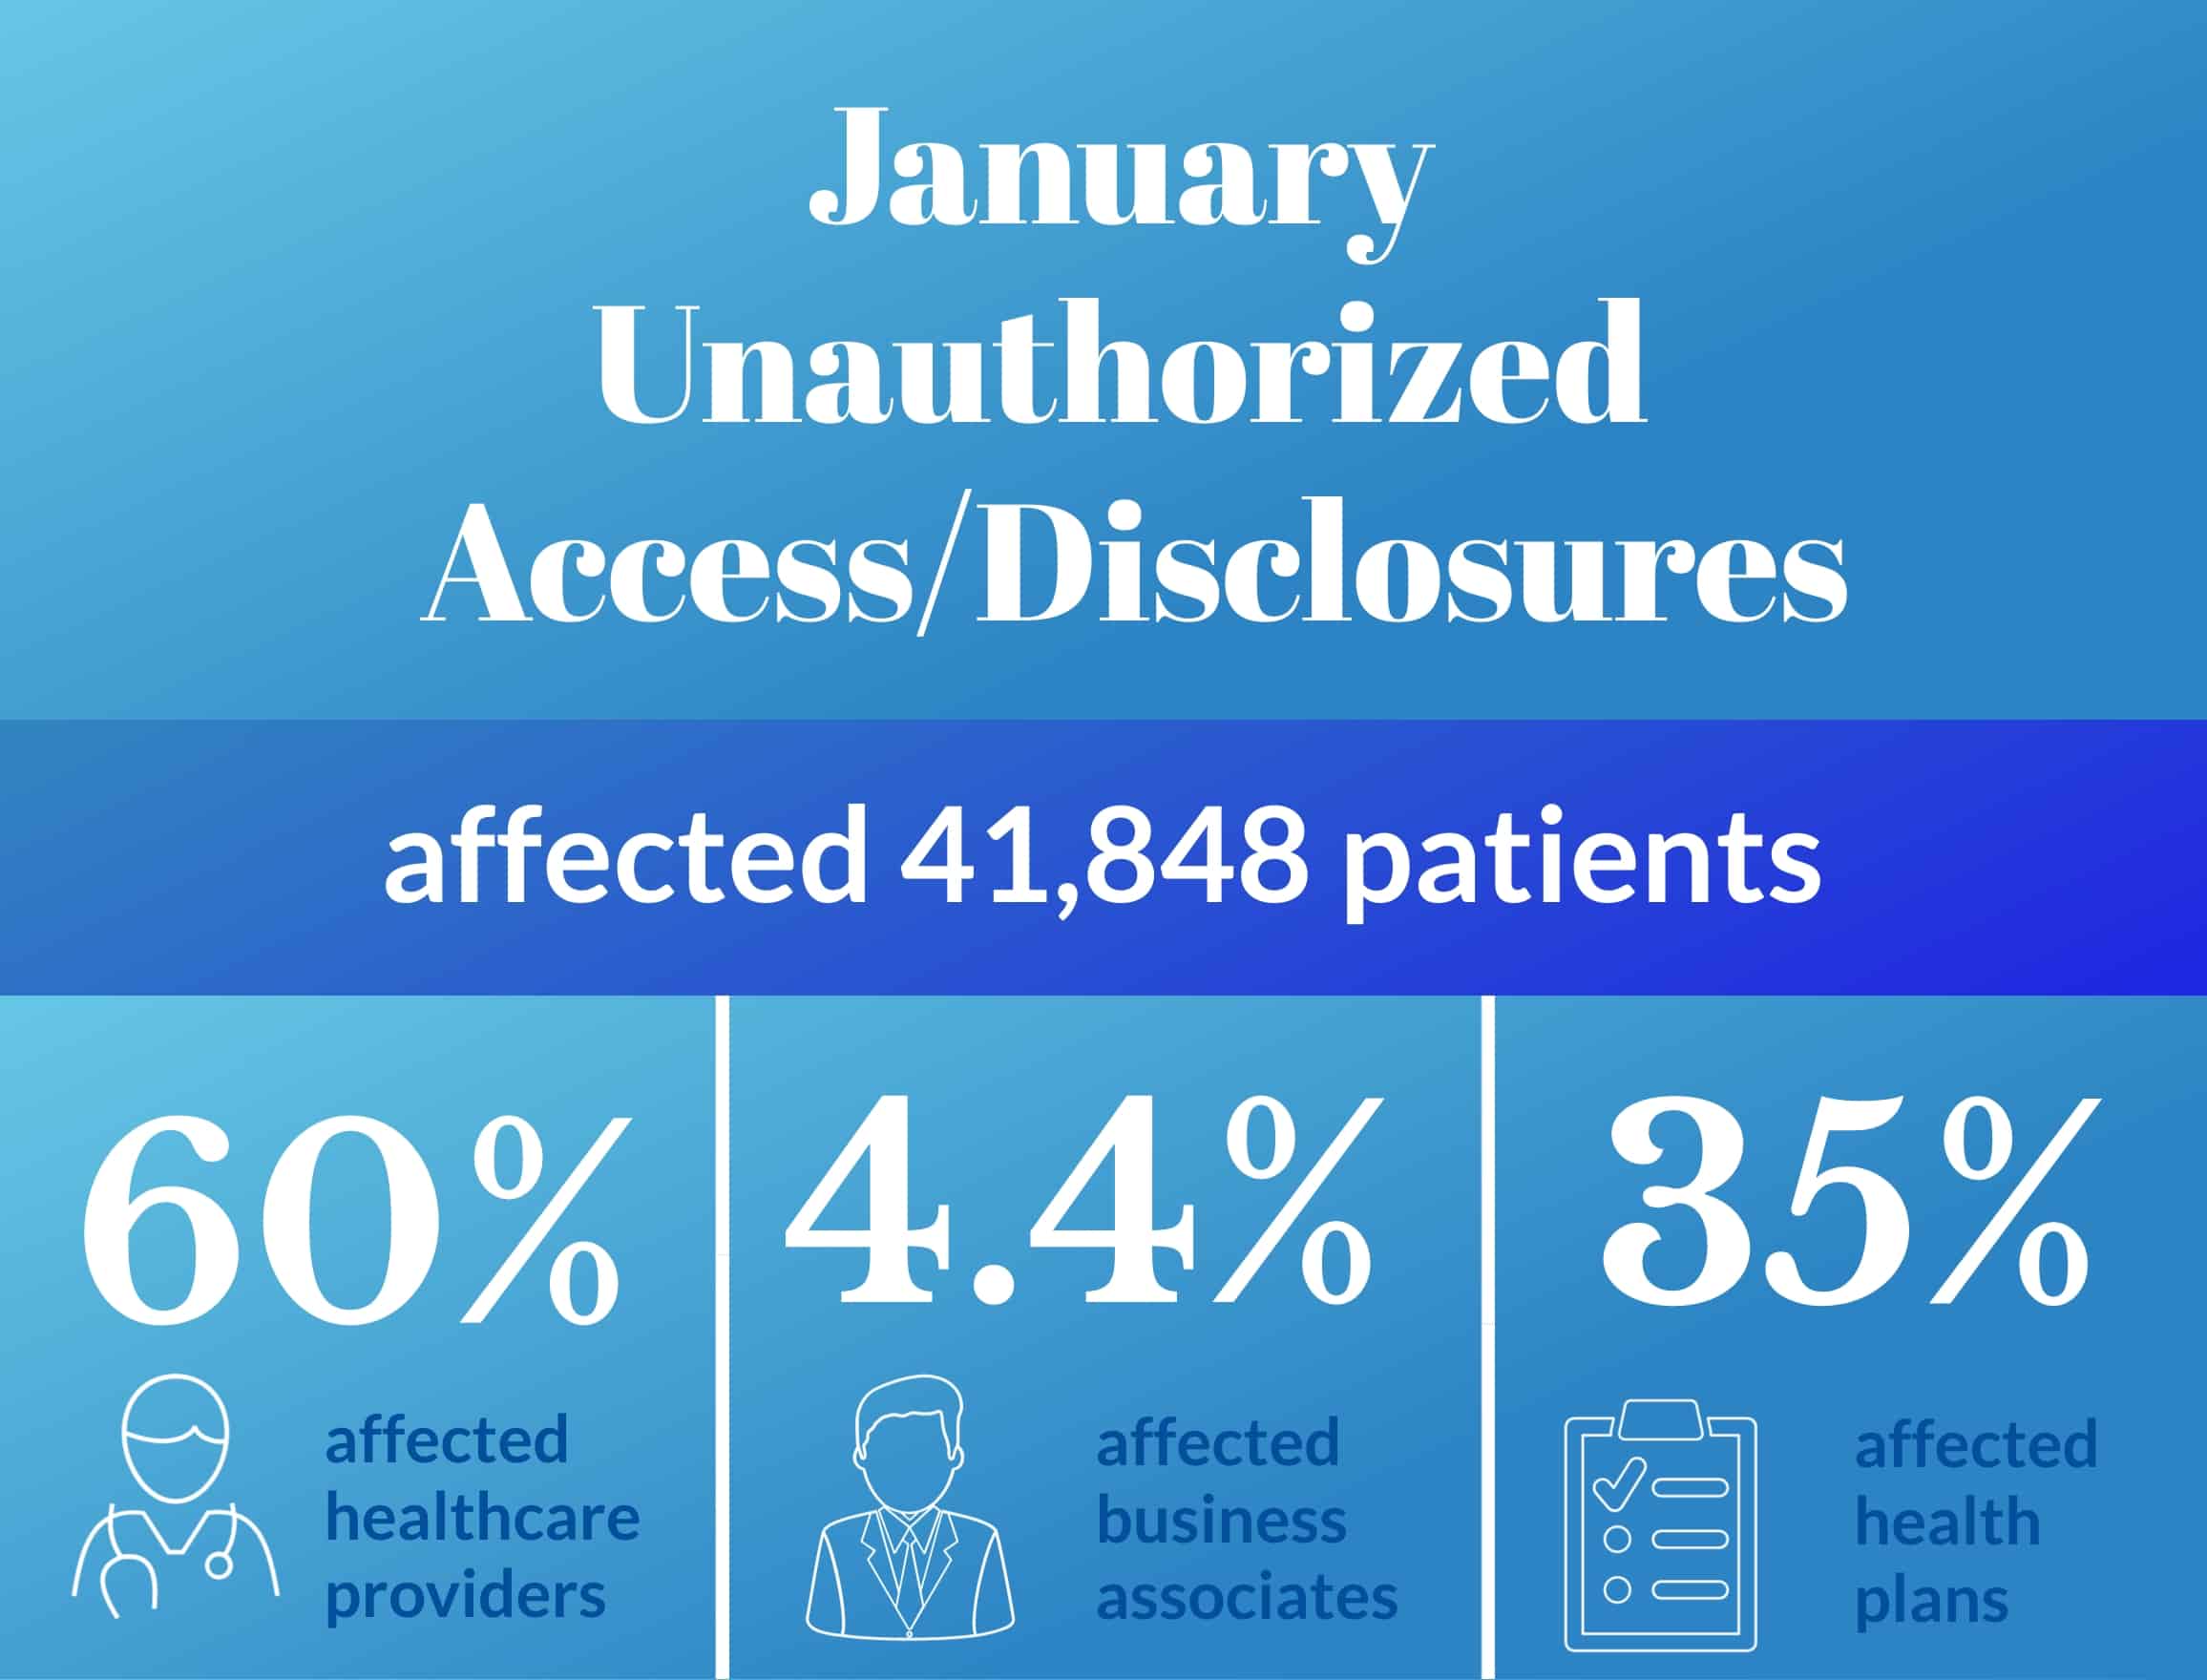 January Unauthorized Access:Disclosures